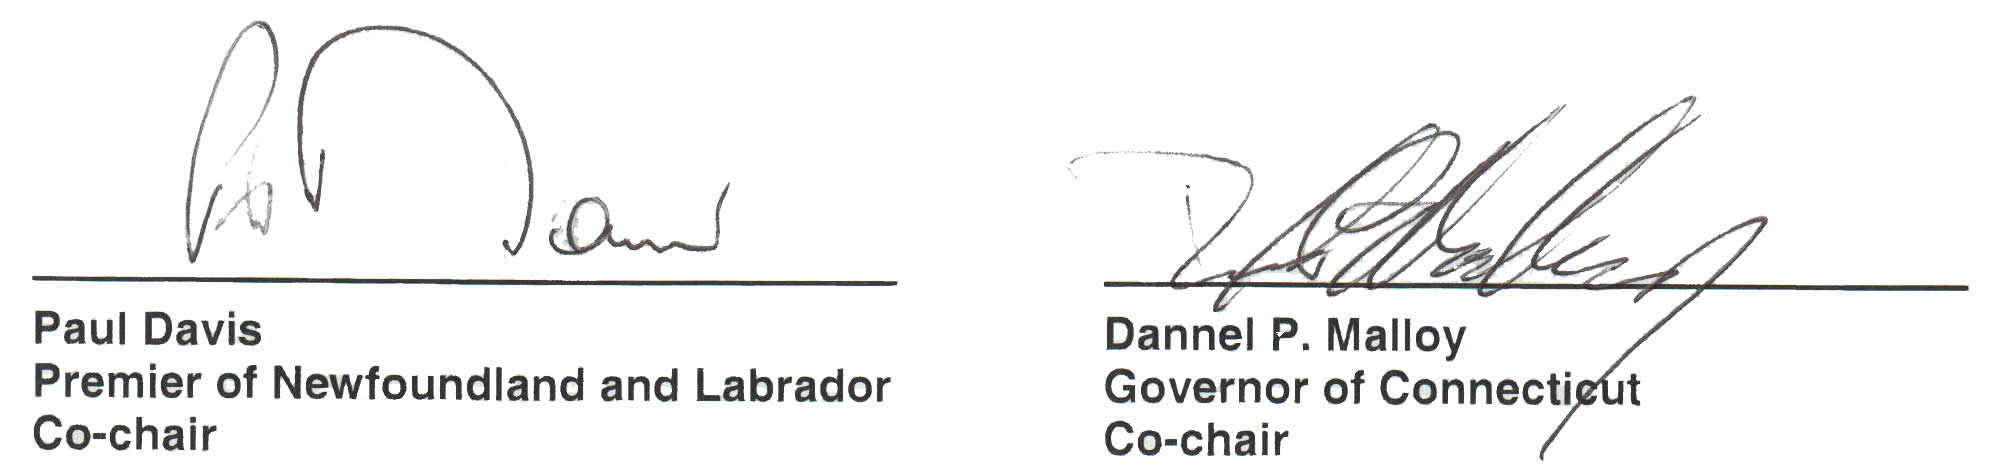 Signature of Paul Davis, Premier of Newfoundland and Labrador, Co-chair and Dannel P. Malloy, Governor of Connecticut, Co-chair